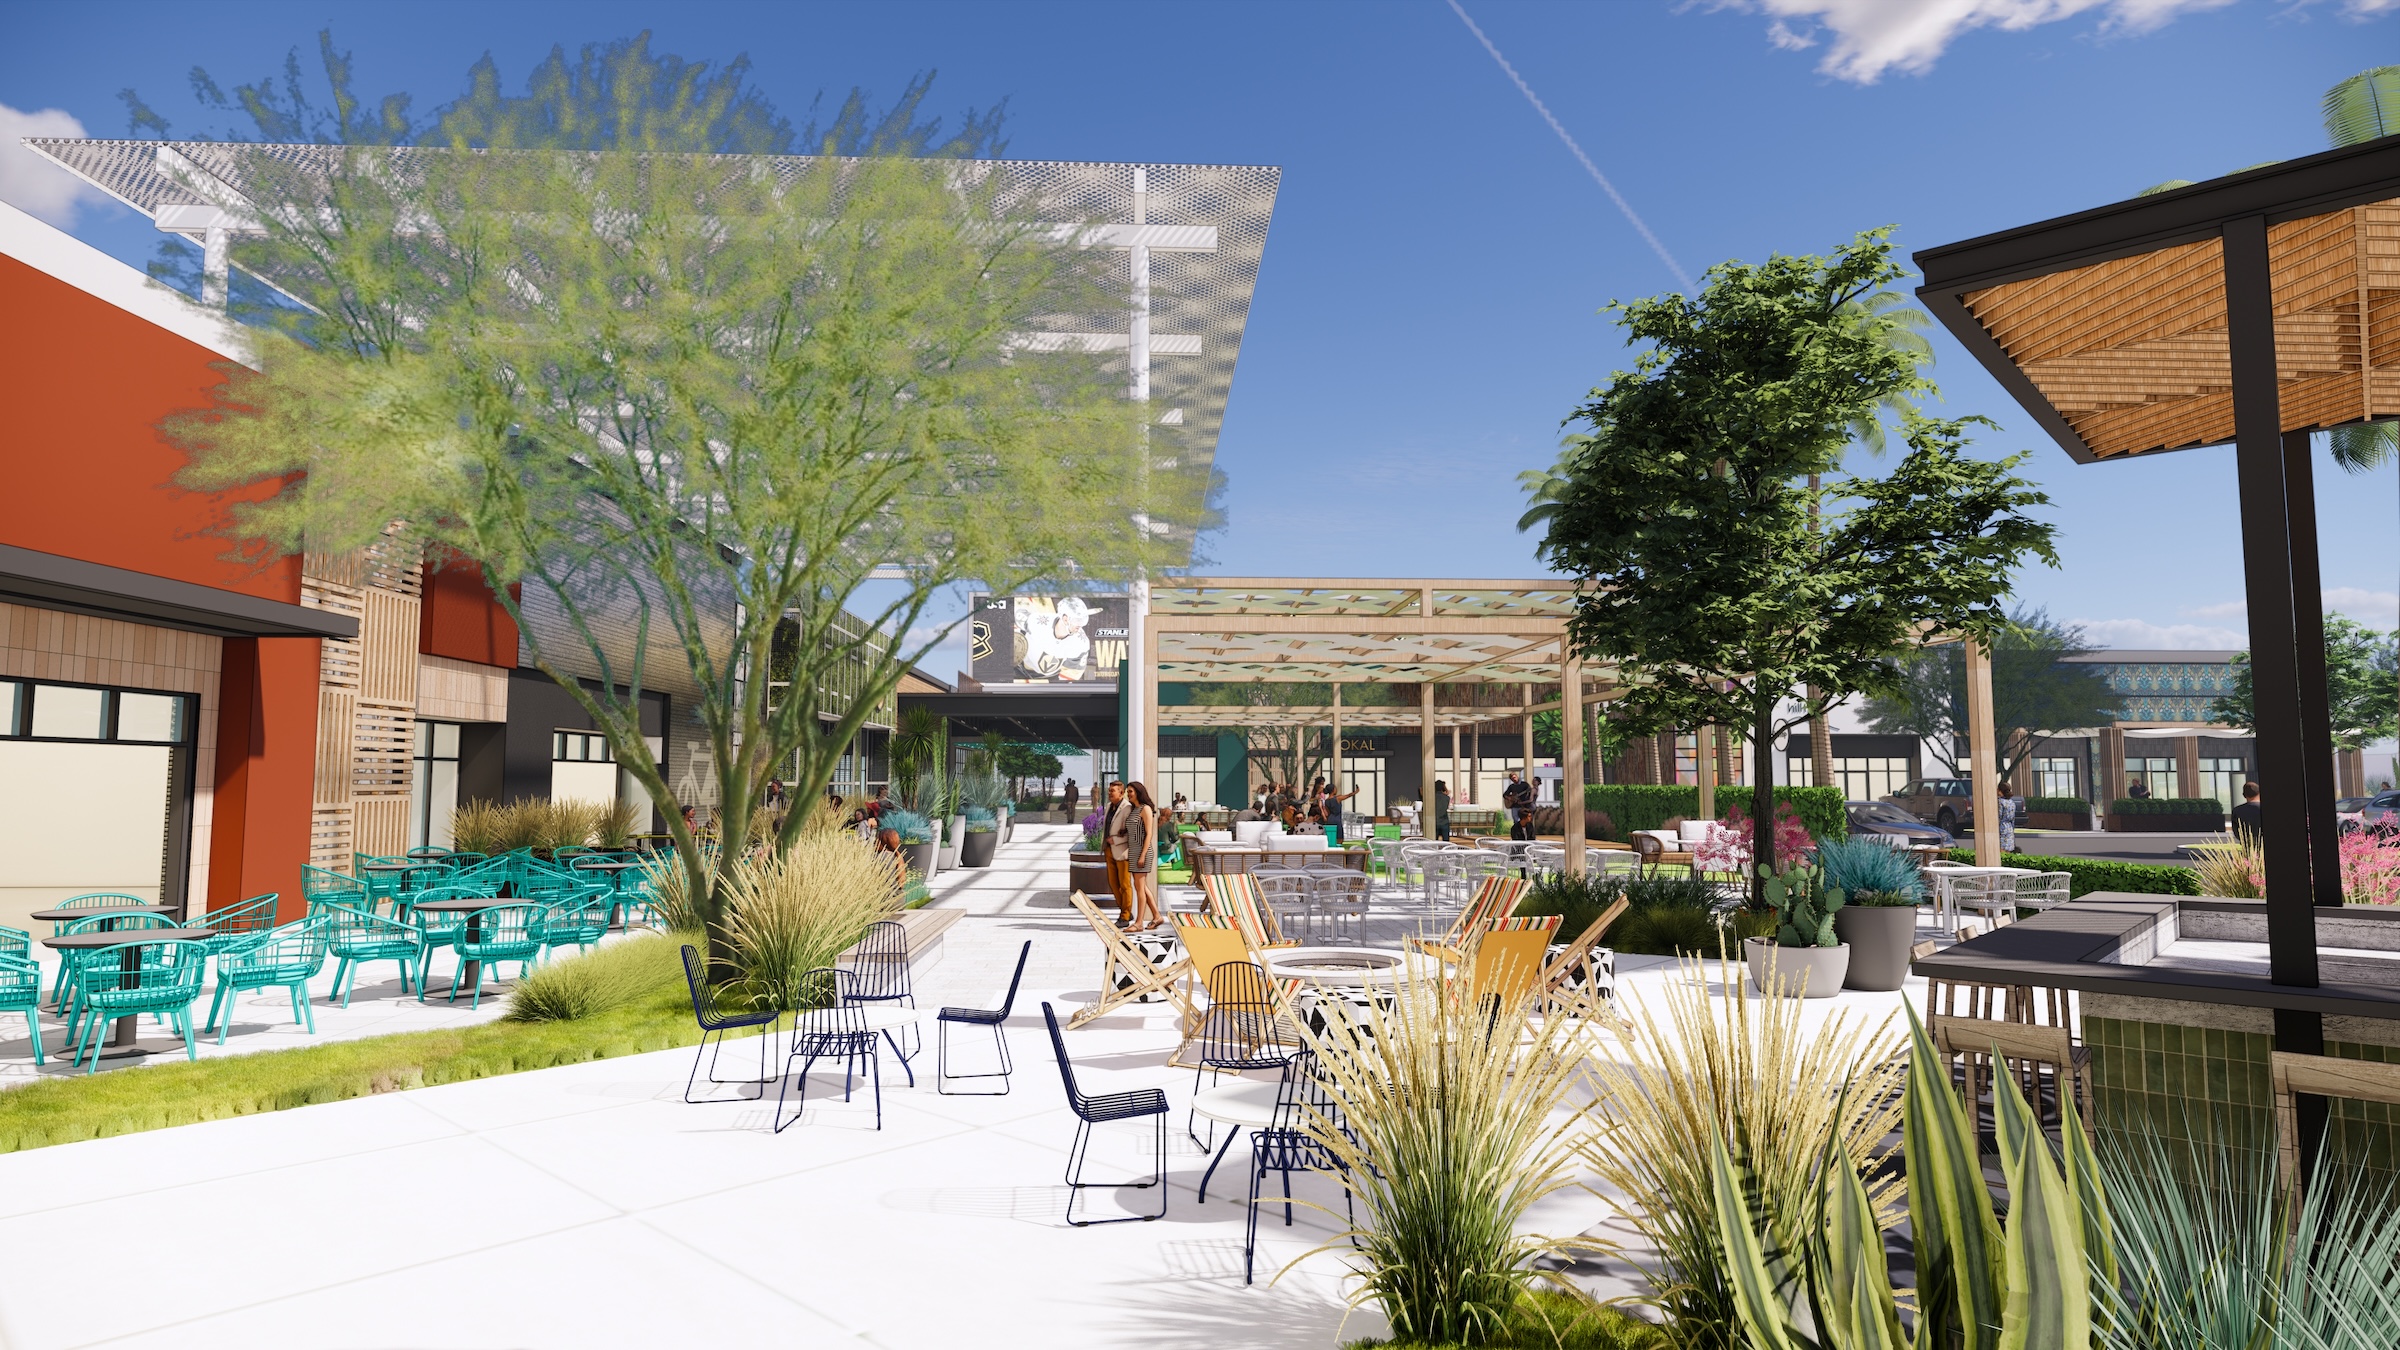 Outside Las Vegas, two unused office buildings will be turned into The Cliffs open-air retail development